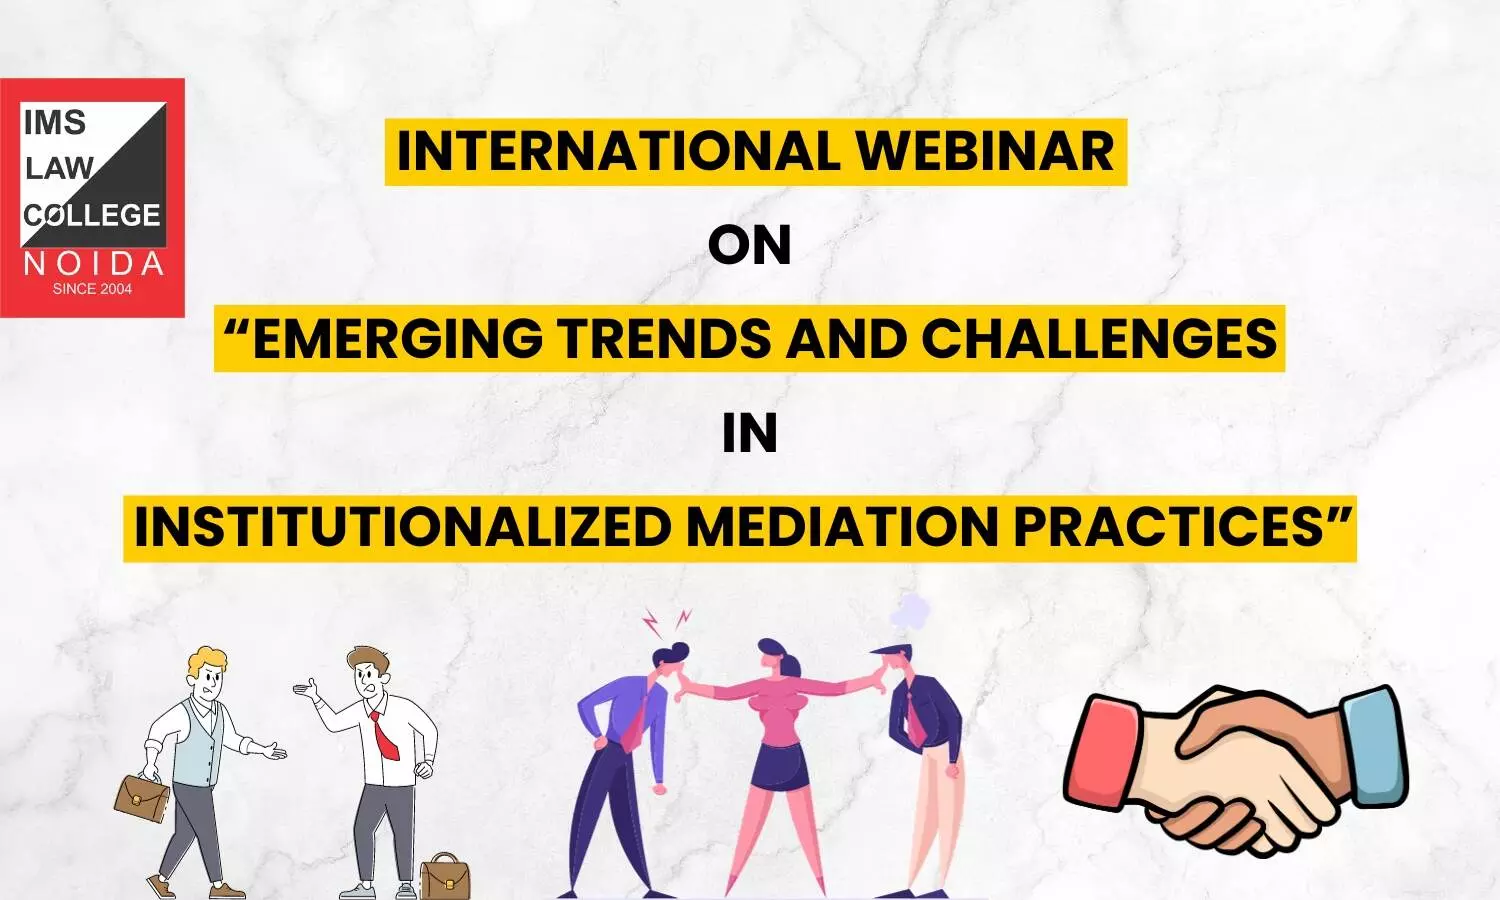 international webinar on “Emerging Trends and Challenges in Institutionalized Mediation Practices”